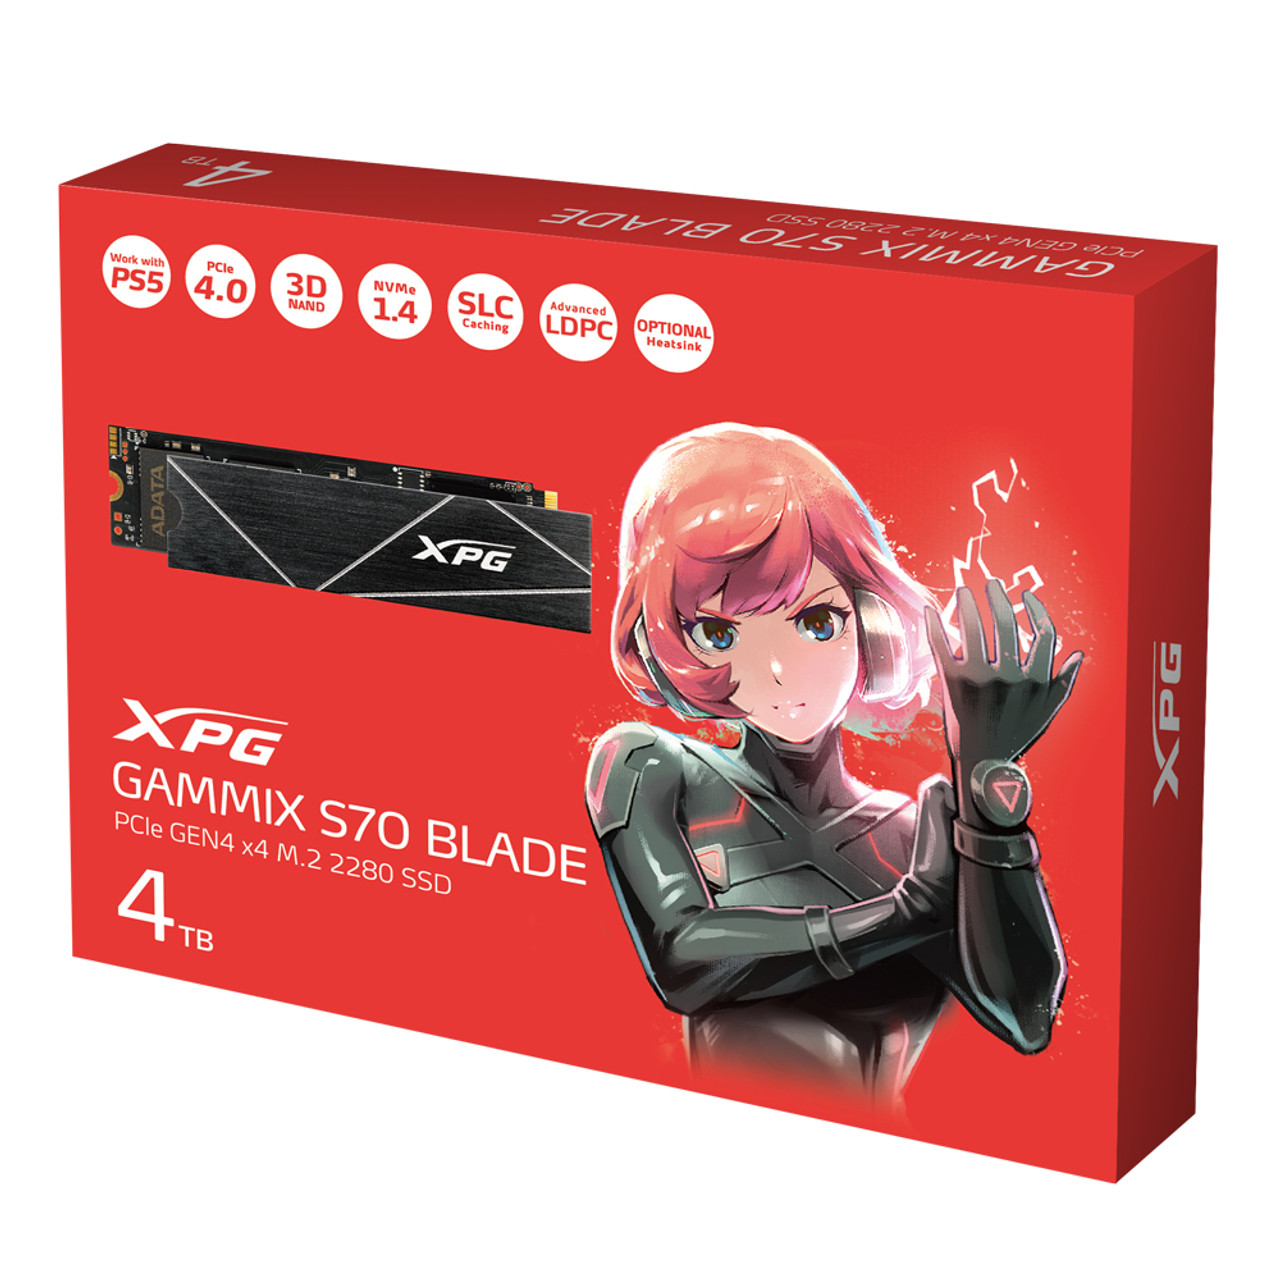 XPG GAMMIX S70 Blade: 4TB M.2 2280 NVMe 3D NAND PCIe Gen4 Gaming Internal  Solid State Drive | PS5 Compatible | Black SSD